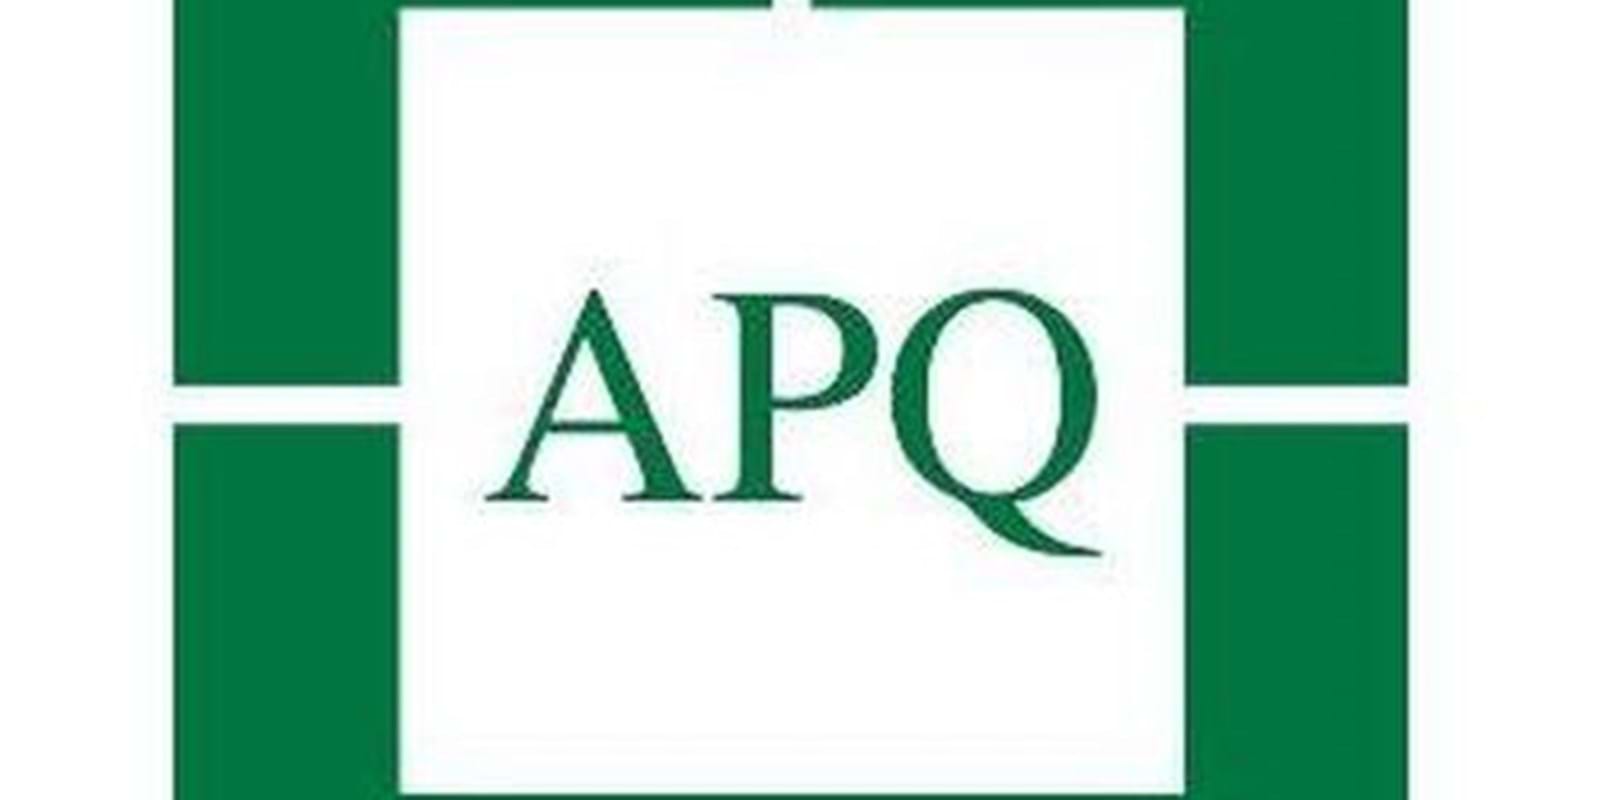 The Association of Quebec Landlords (APQ): A study shows that the ‘assistance to the stone’ must cease.